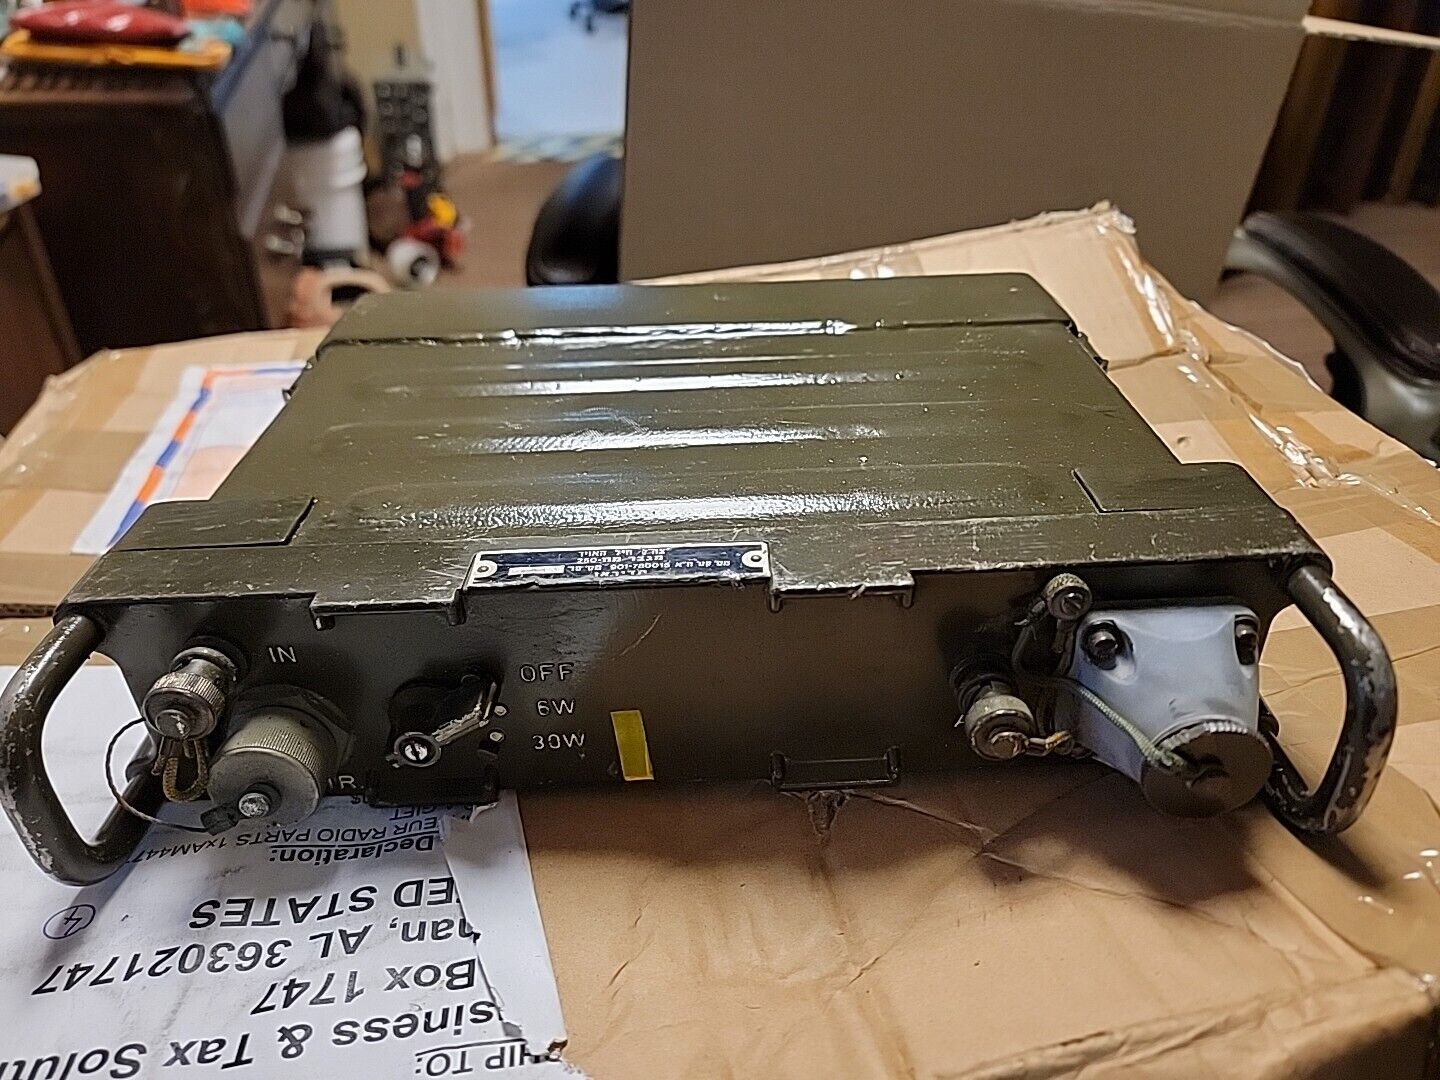 RANGE BOOSTER AMPLIFIER AM-4477 RB-25 FOR PRC-77 / PRC-25 Military Radio 